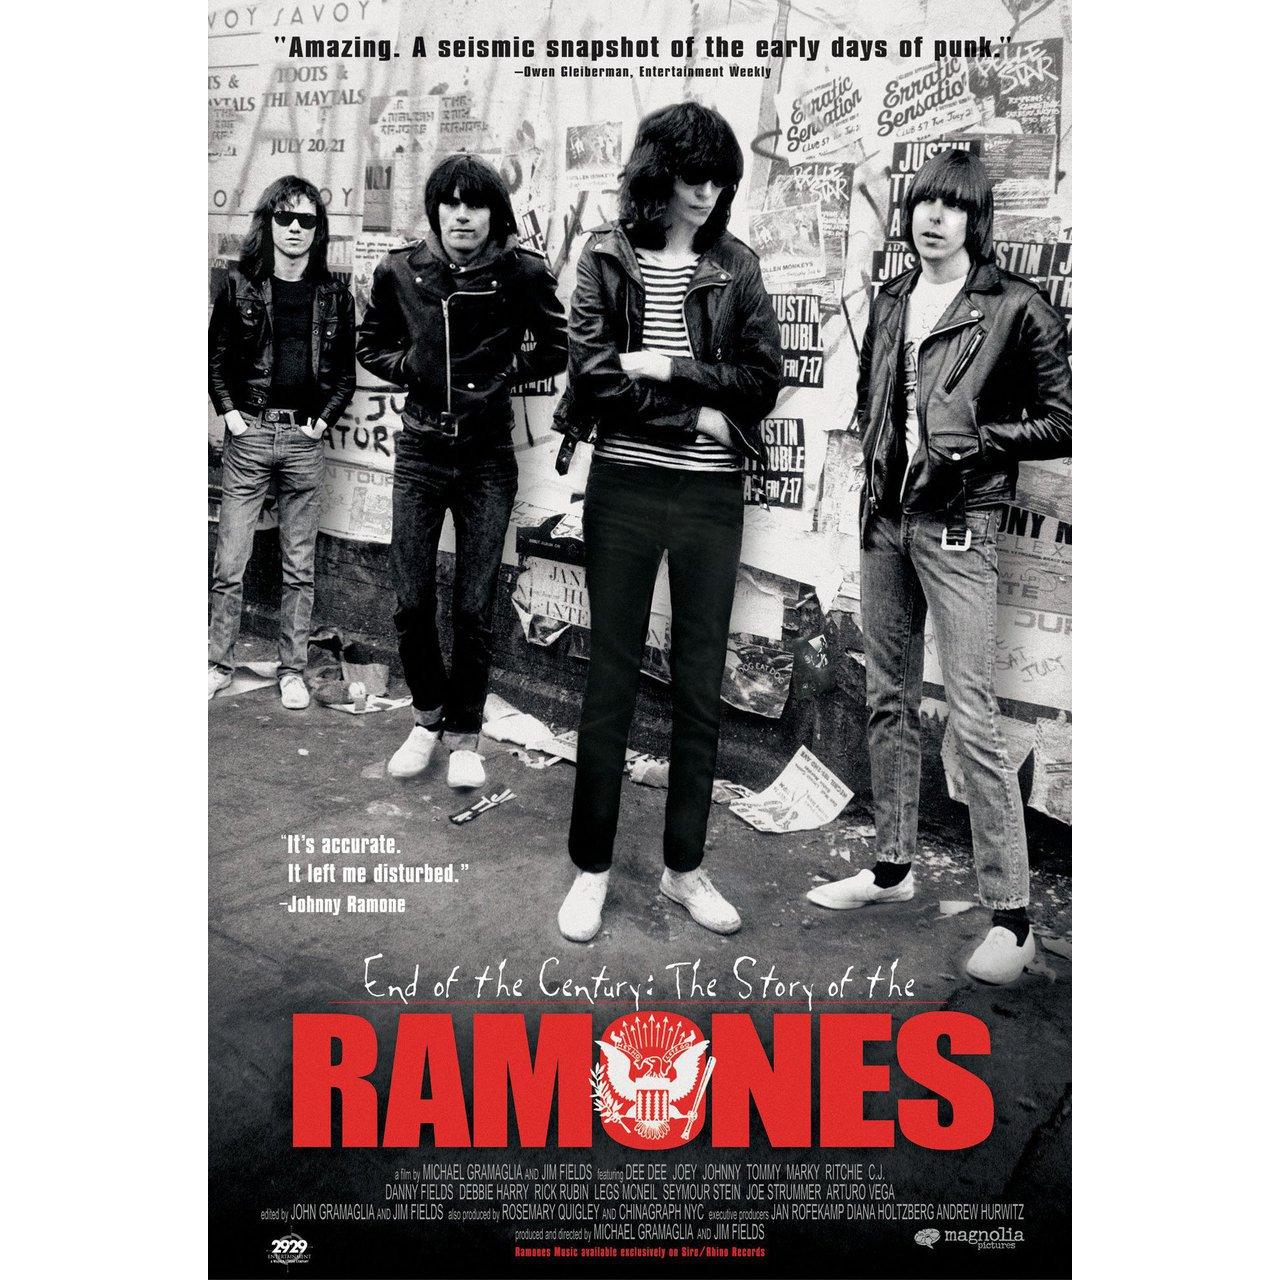 Original 2003 U.S. one sheet poster for the documentary film “End of the Century: The Story of the Ramones” directed by Jim Fields / Michael Gramaglia with Marky Ramone / Johnny Ramone / Dee Dee Ramone / Tommy Ramone / The Ramones. Very good-fine